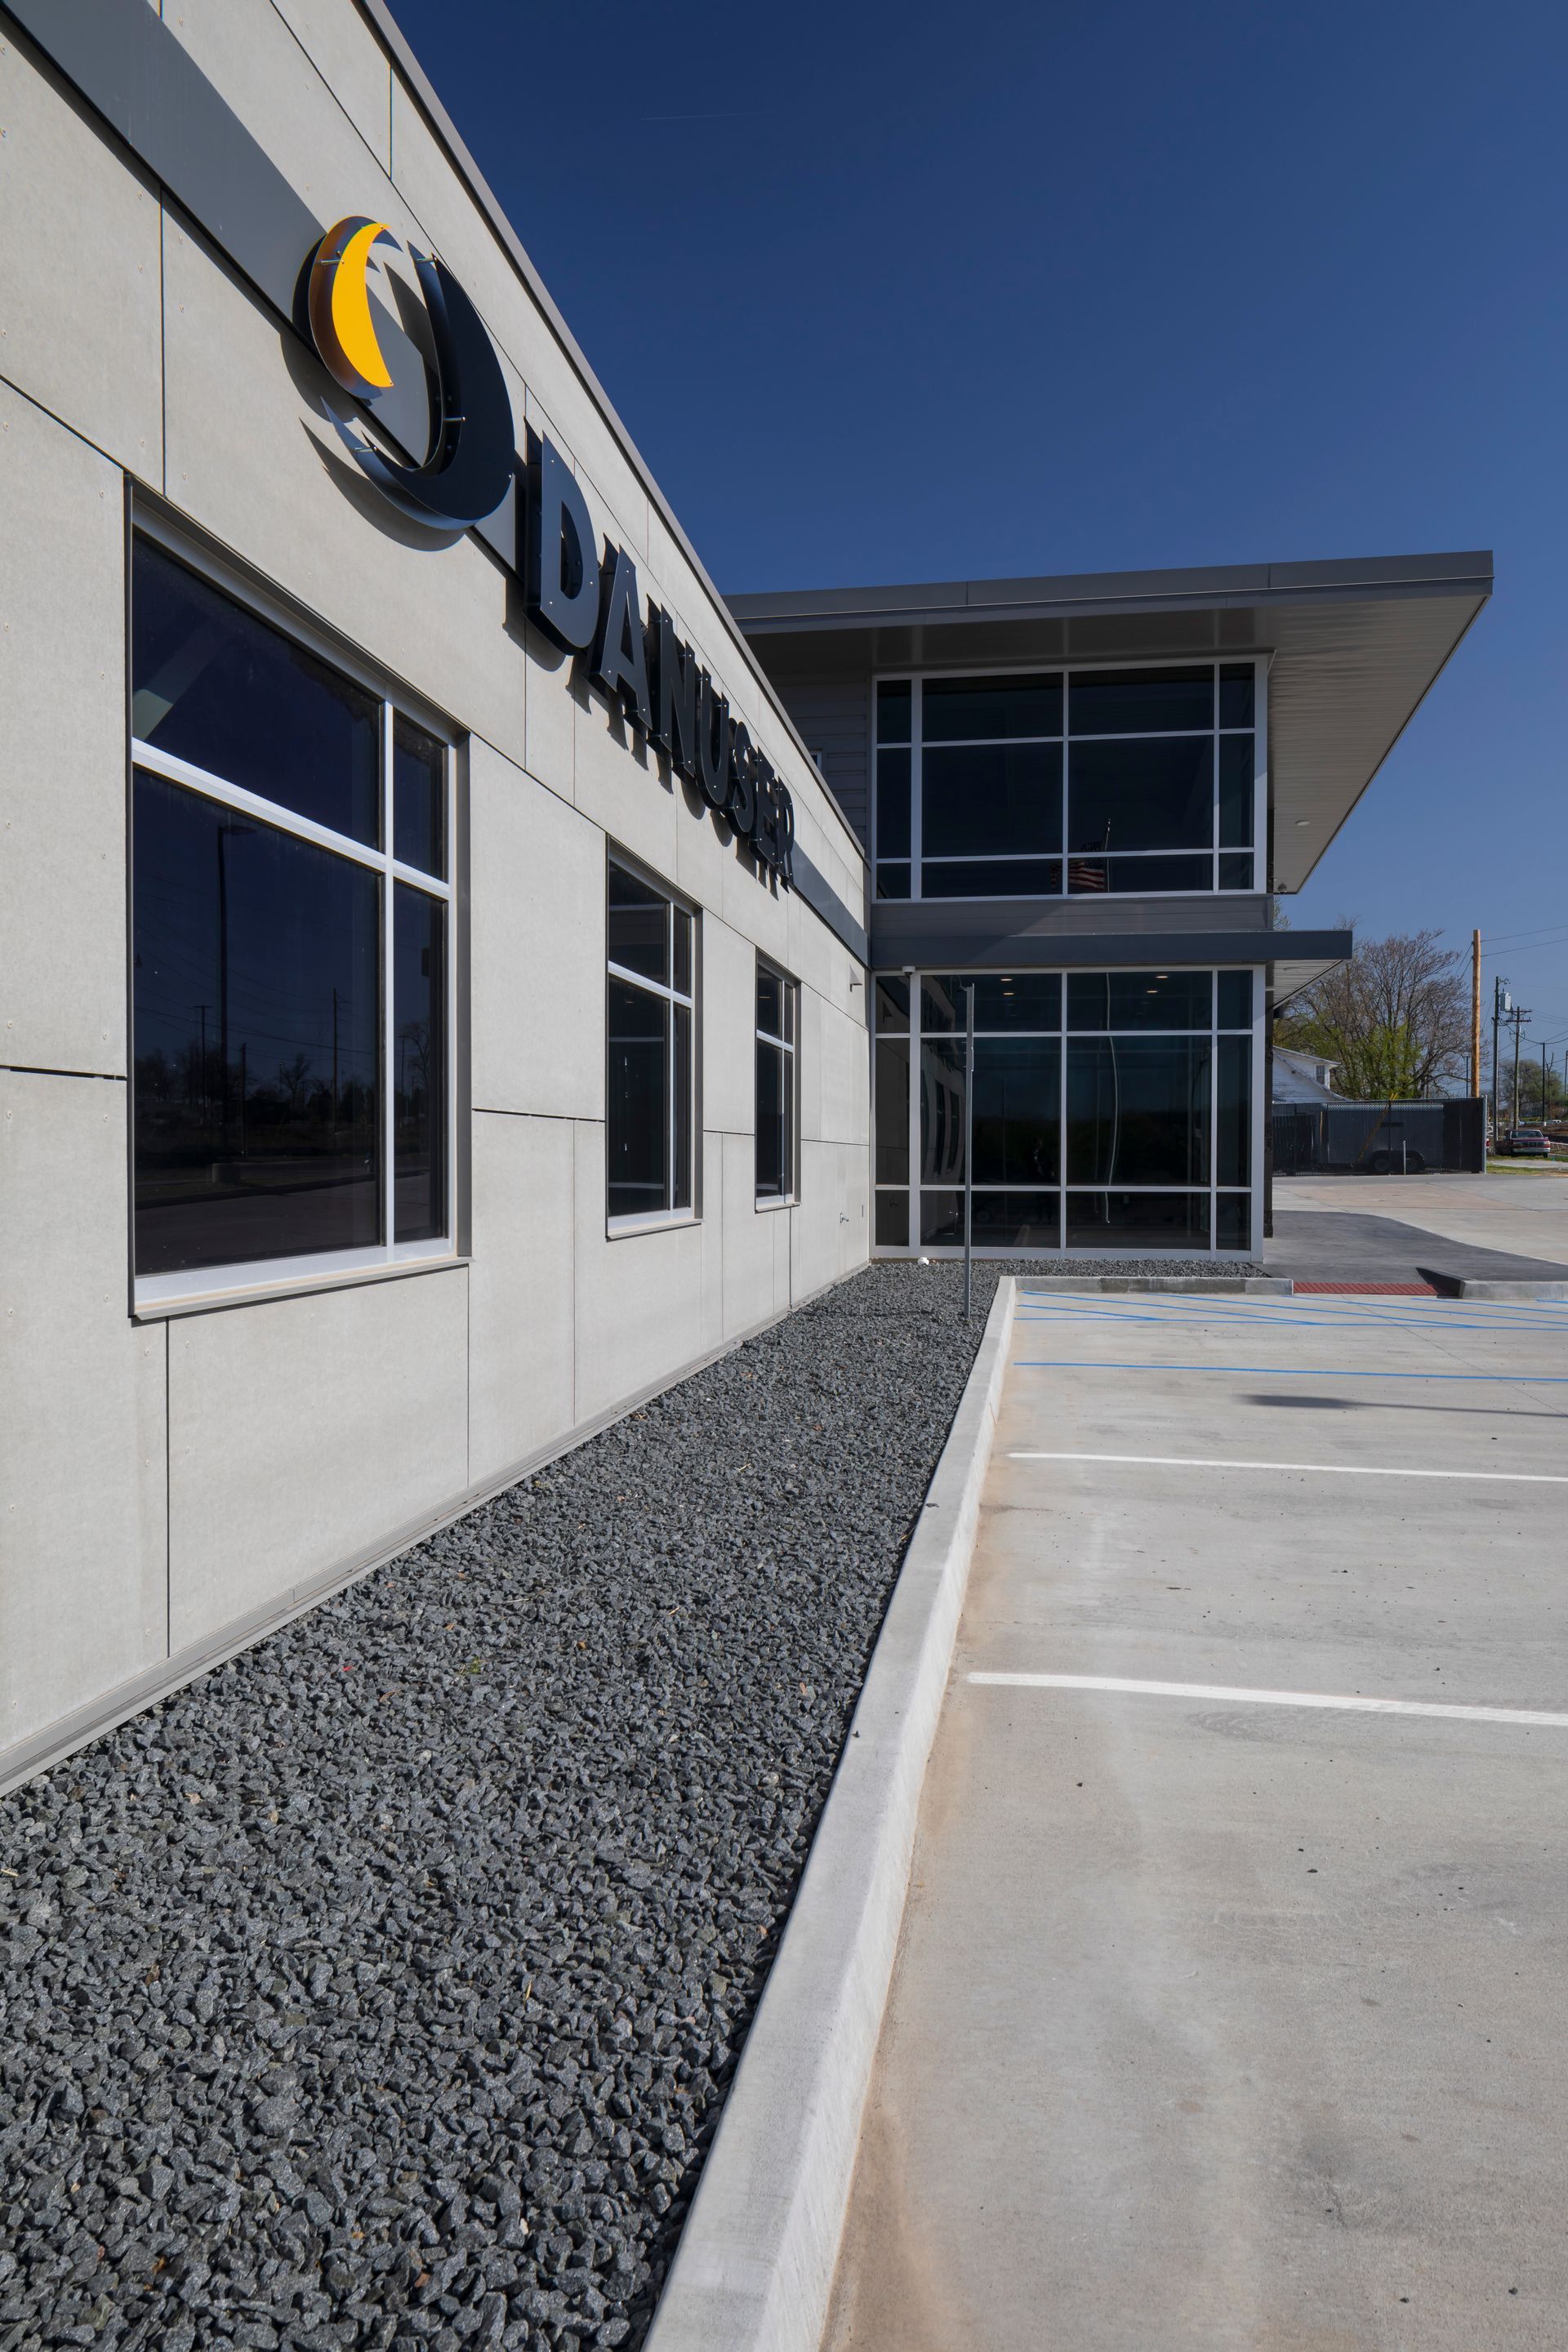 Professional Contractors & Engineers Builds Stunning Offices in Sedalia, MO.